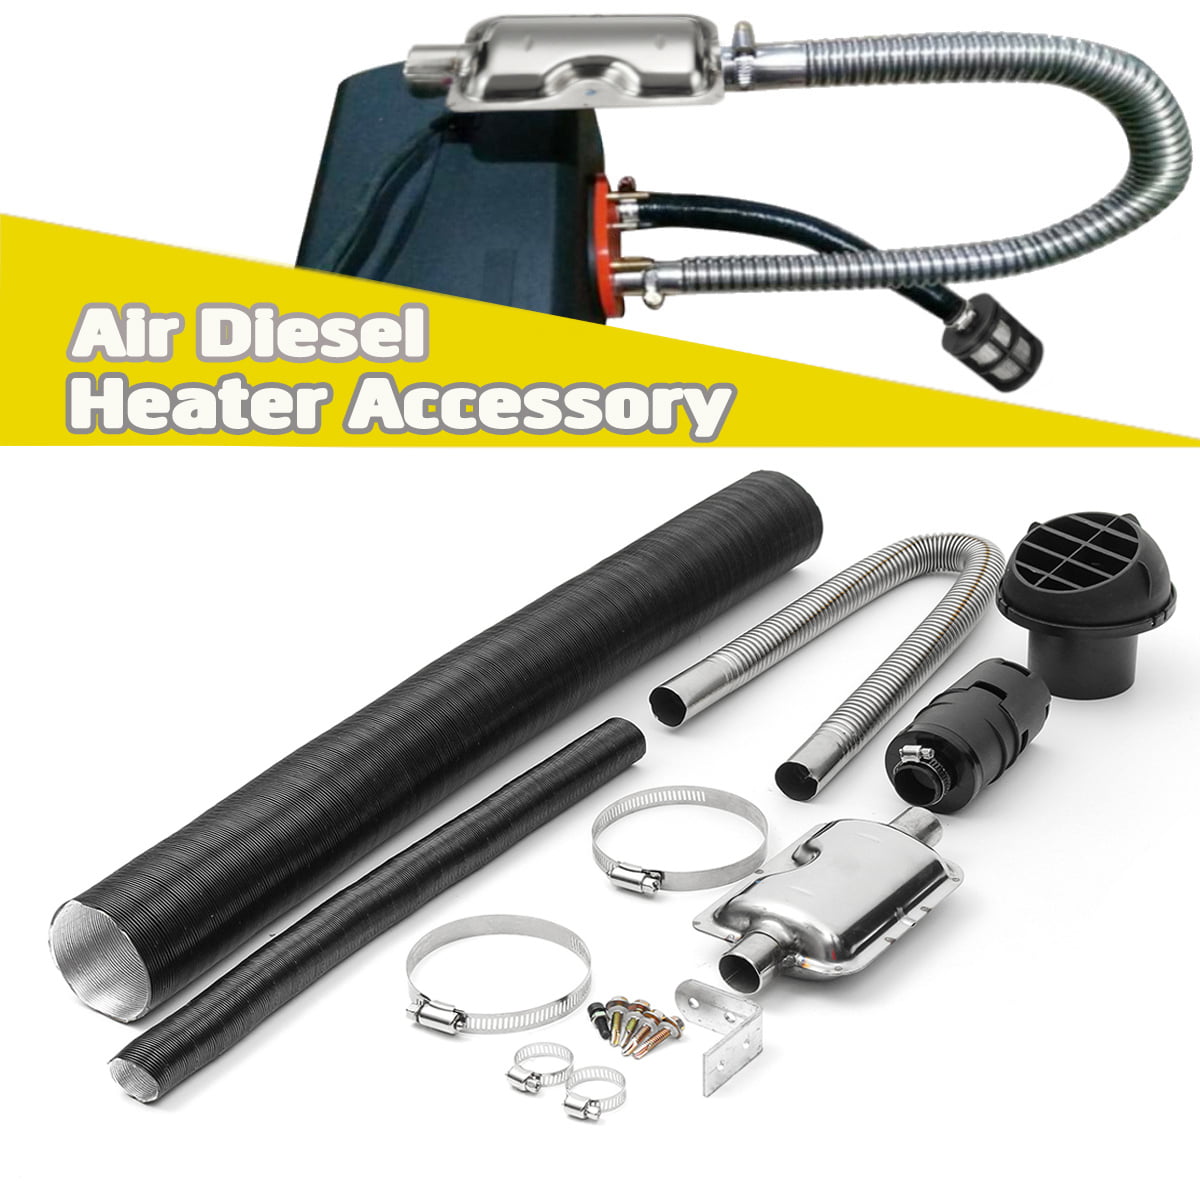 Stainless Steel Pipe Silencer Heater Kit Car Heater Accessories for Parking Air Heaters Tavot 120cm Exhaust Muffler Silencer 